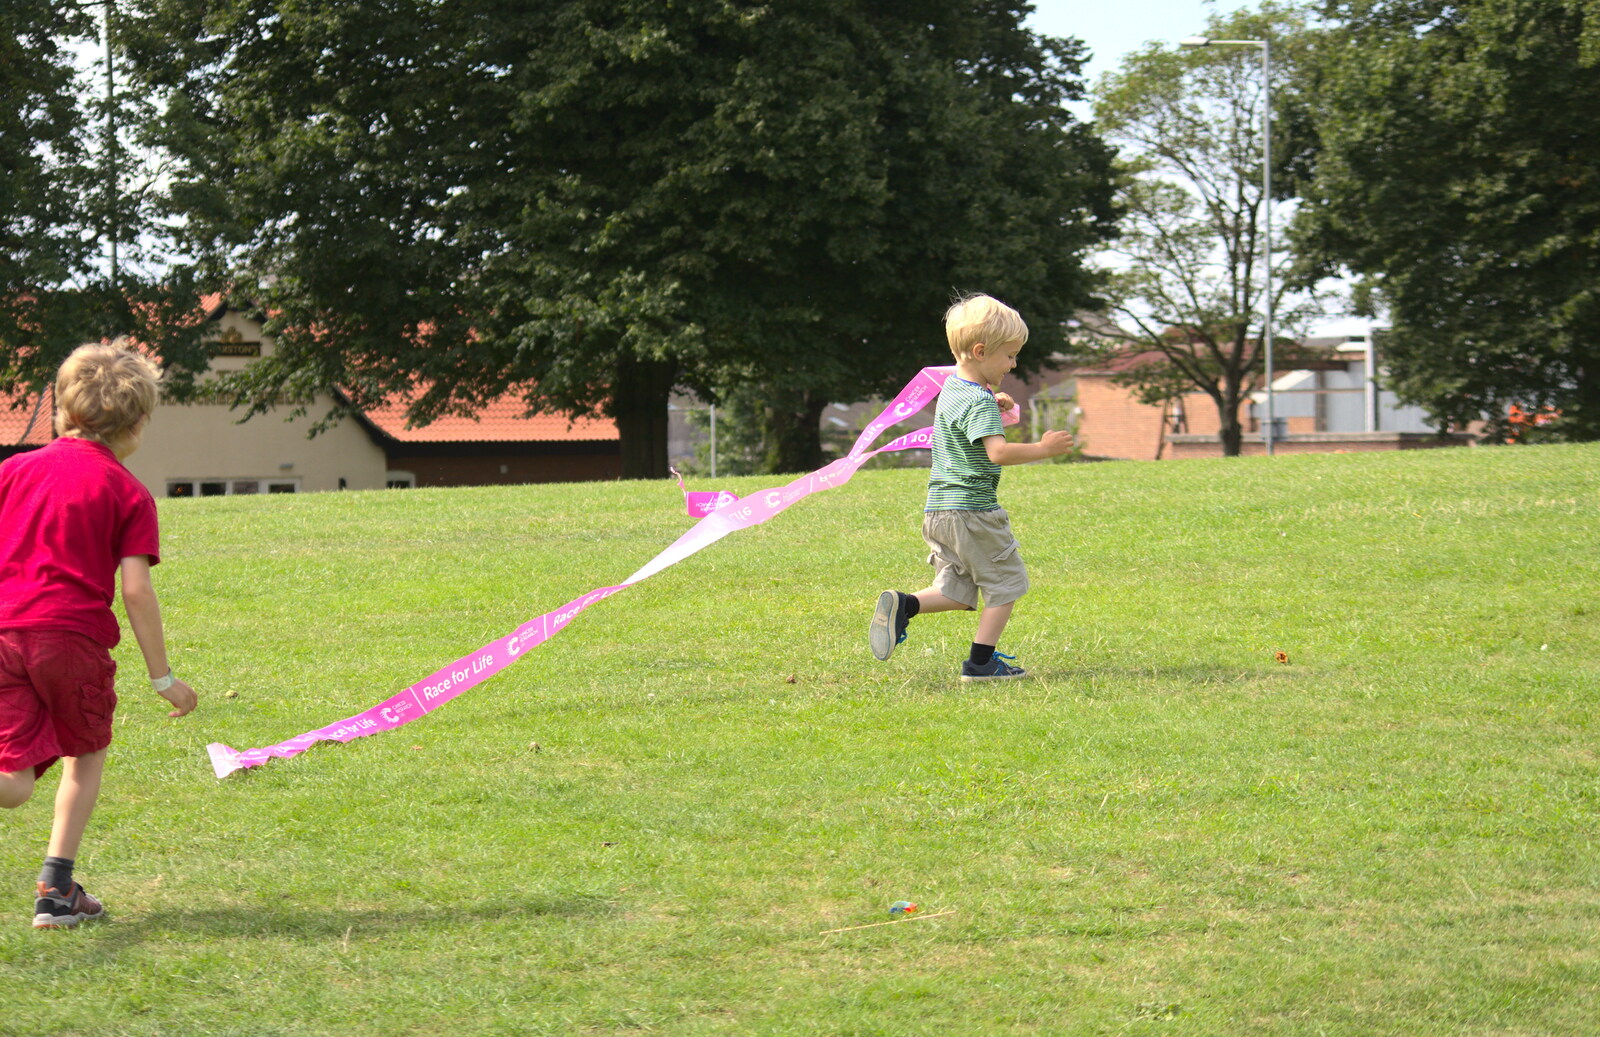 Harry runs off with the tape from A Race For Life, The Park, Diss, Norfolk - 16th August 2015